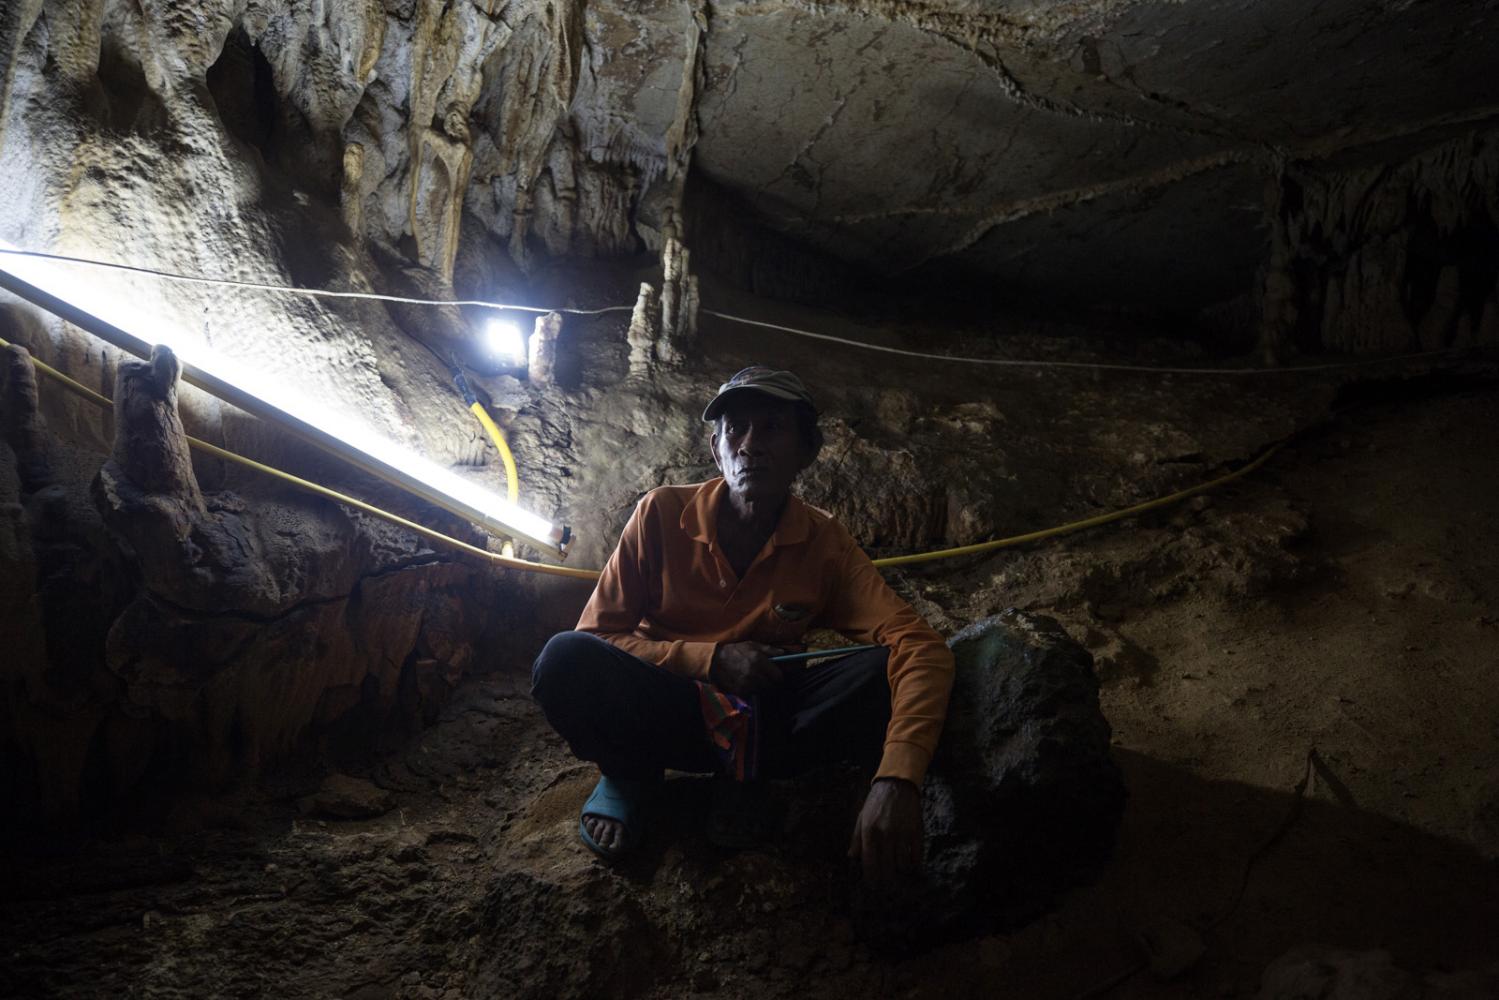 Kiang Pimpan, 57, sits inside a large cave complex containing 10 chambers in an adjacent mountain. The locals fear that when the mining company uses dynamite to explode the rock it could cause the collapse of this cave that they hope will attract tourists in the future